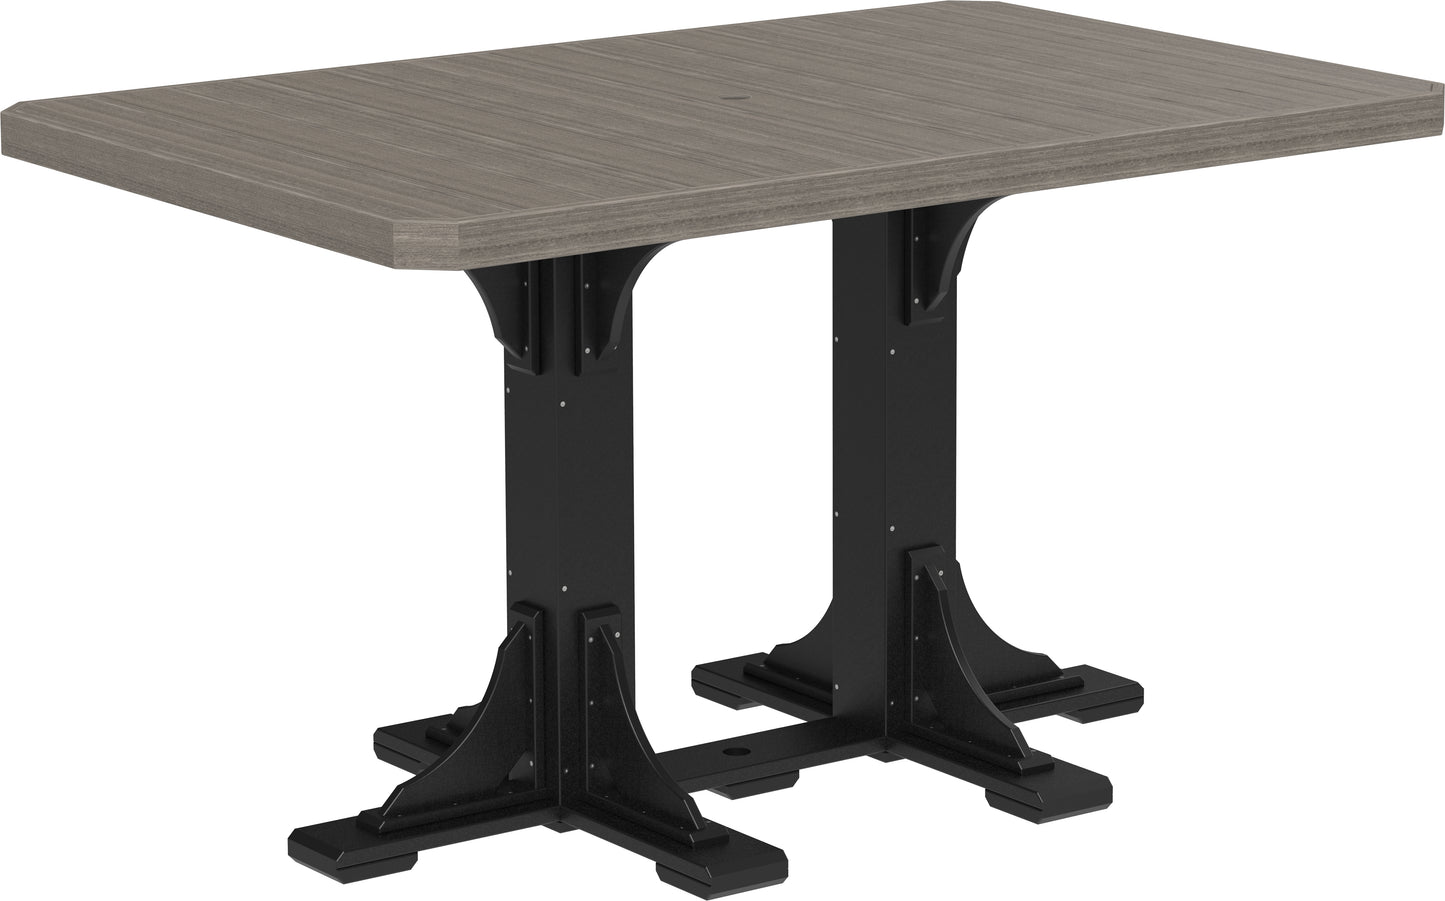 LuxCraft Recycled Plastic 4x6' Rectangular Bar Height Table - LEAD TIME TO SHIP 3 TO 4 WEEKS